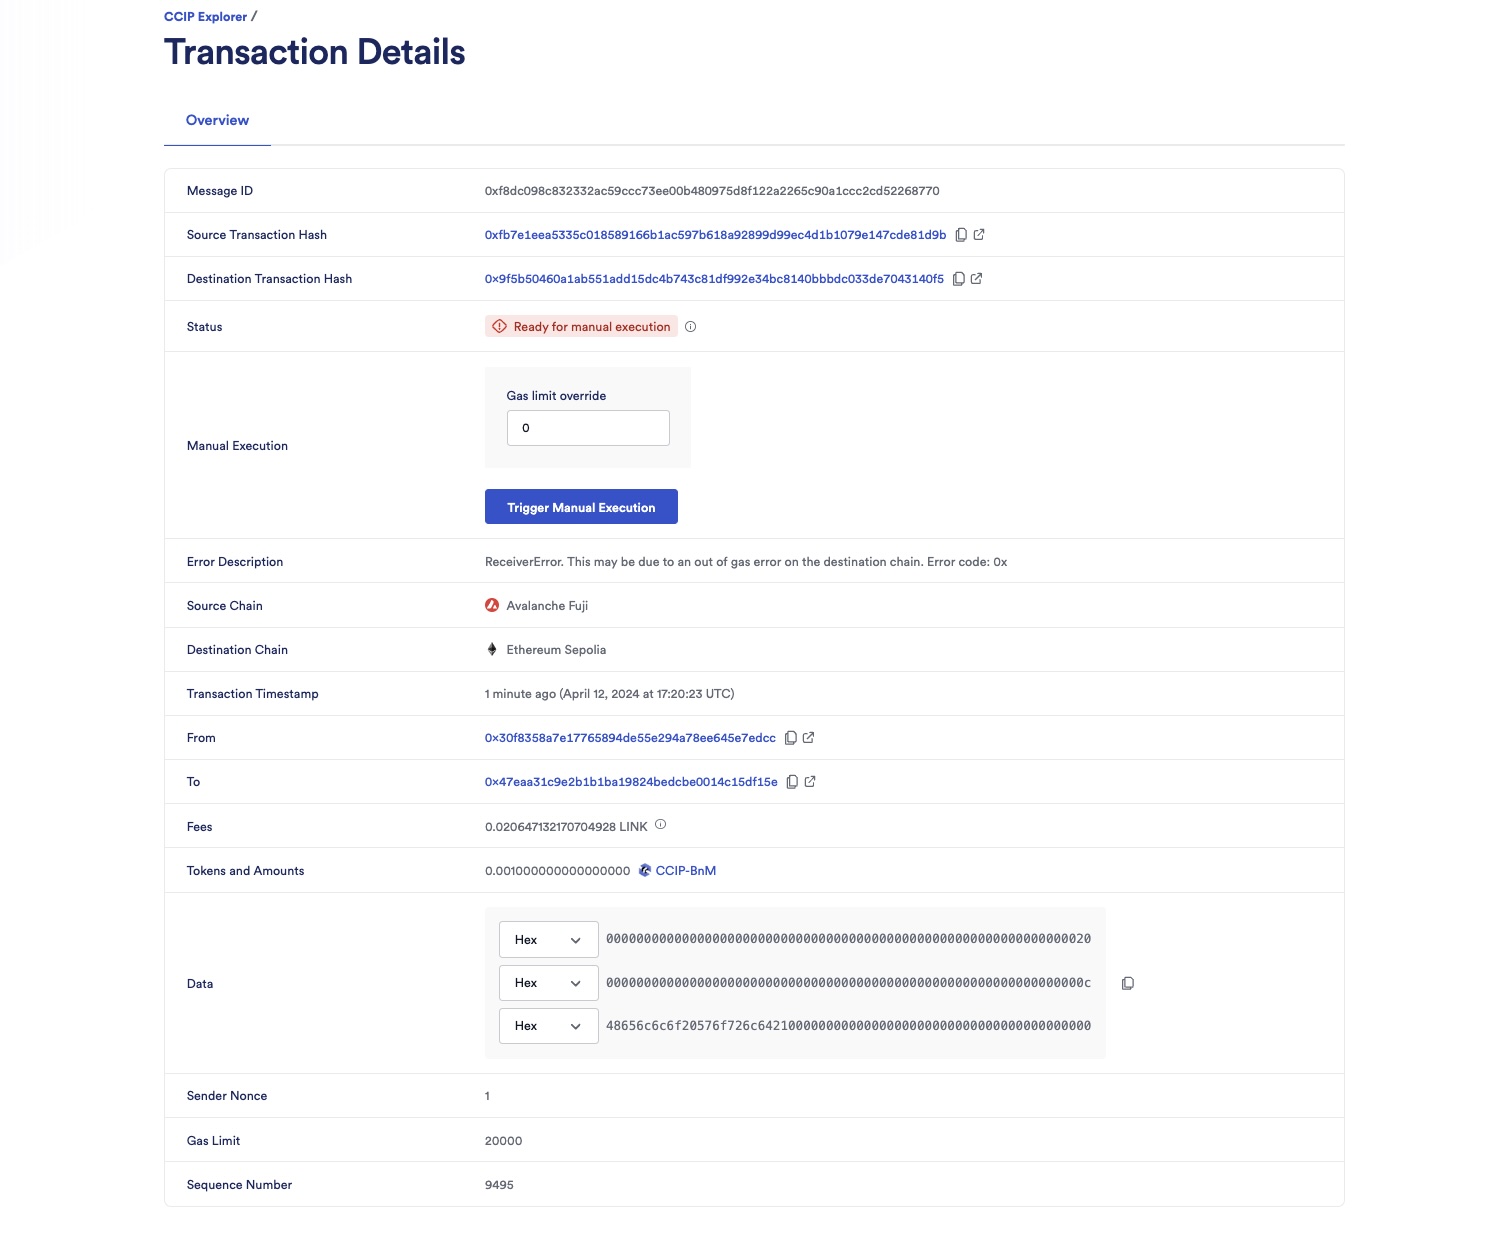 Chainlink CCIP Explorer transaction details ready for manual execution